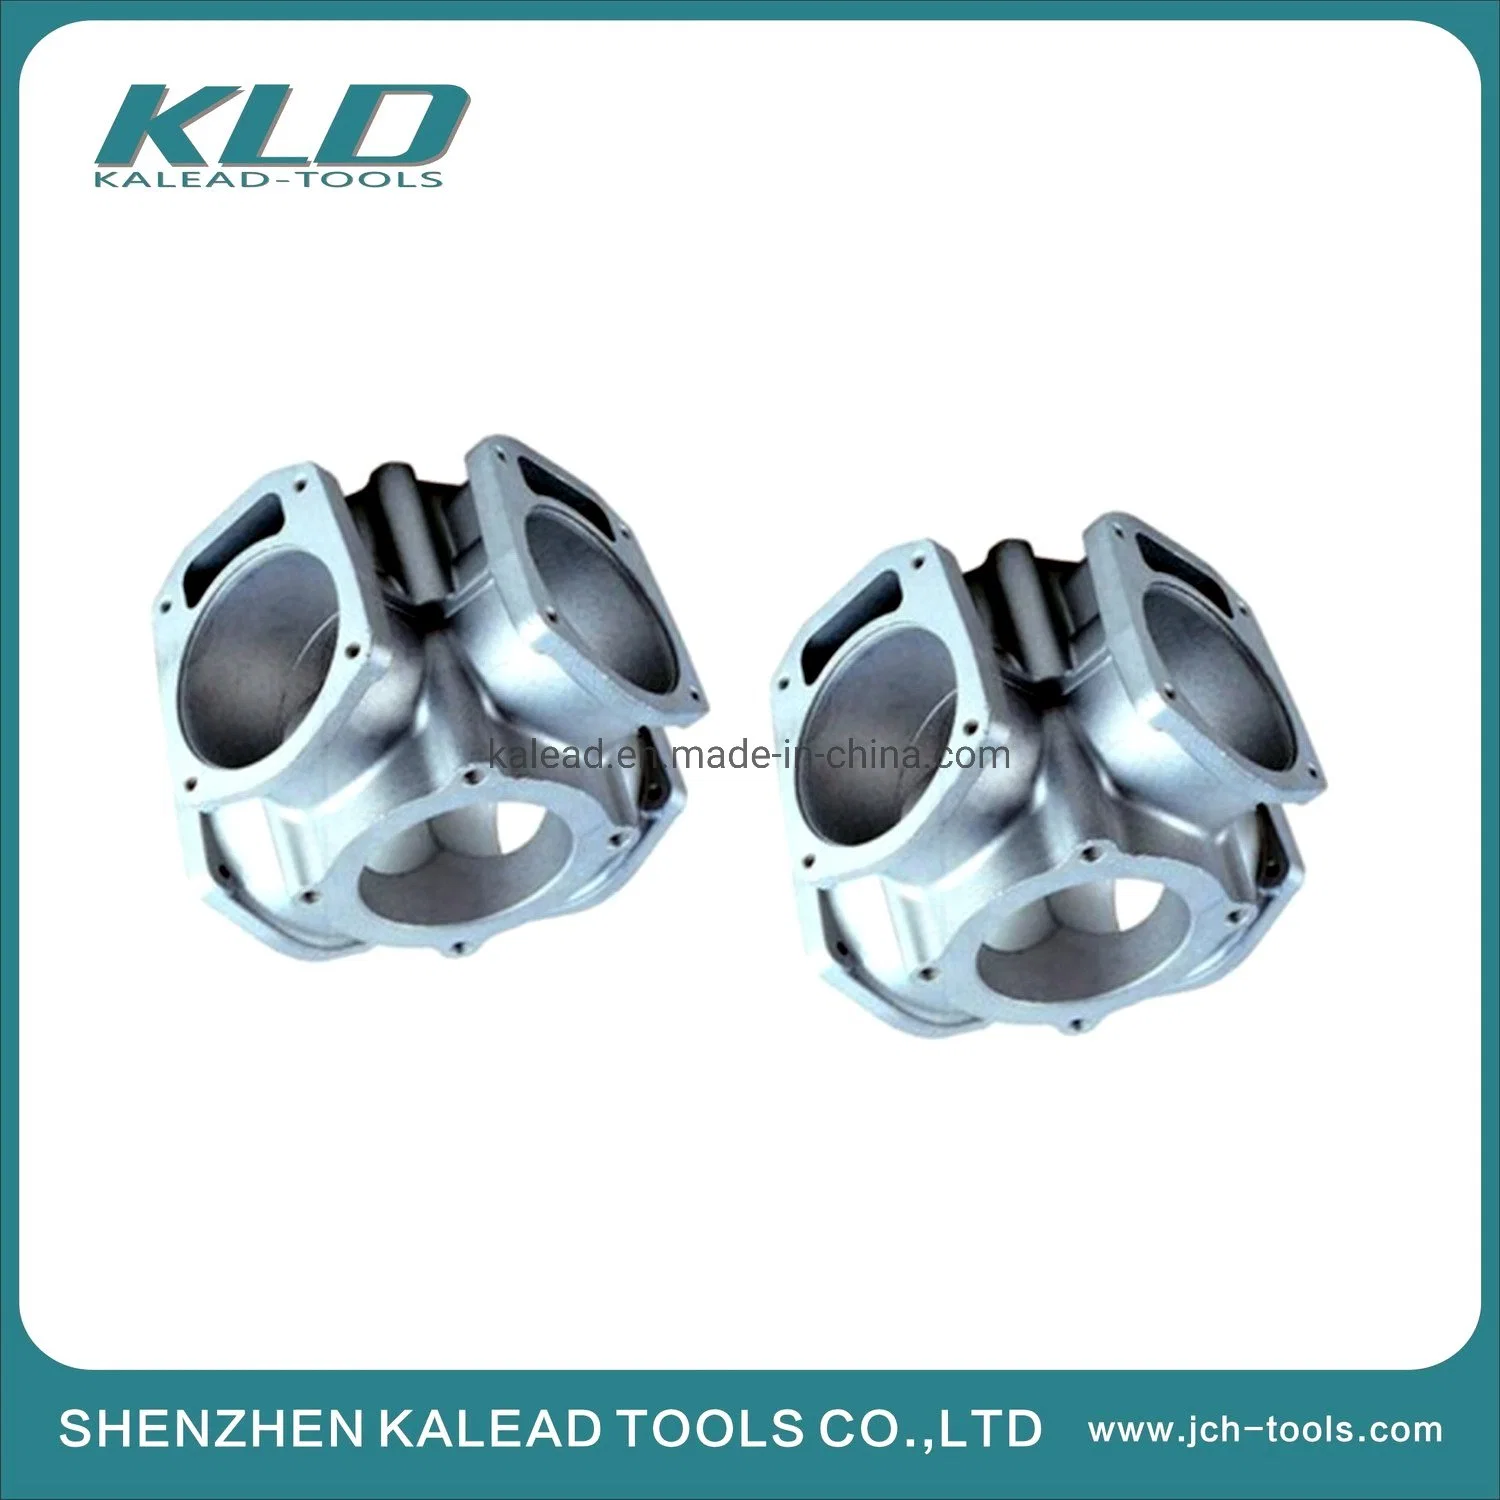 Customized Stainless Steel Mould Aluminum Zinc Alloy Precision Die Blank Casting in Lost Wax Investment Ductile Iron Casting for Mechining Parts Auto Casting